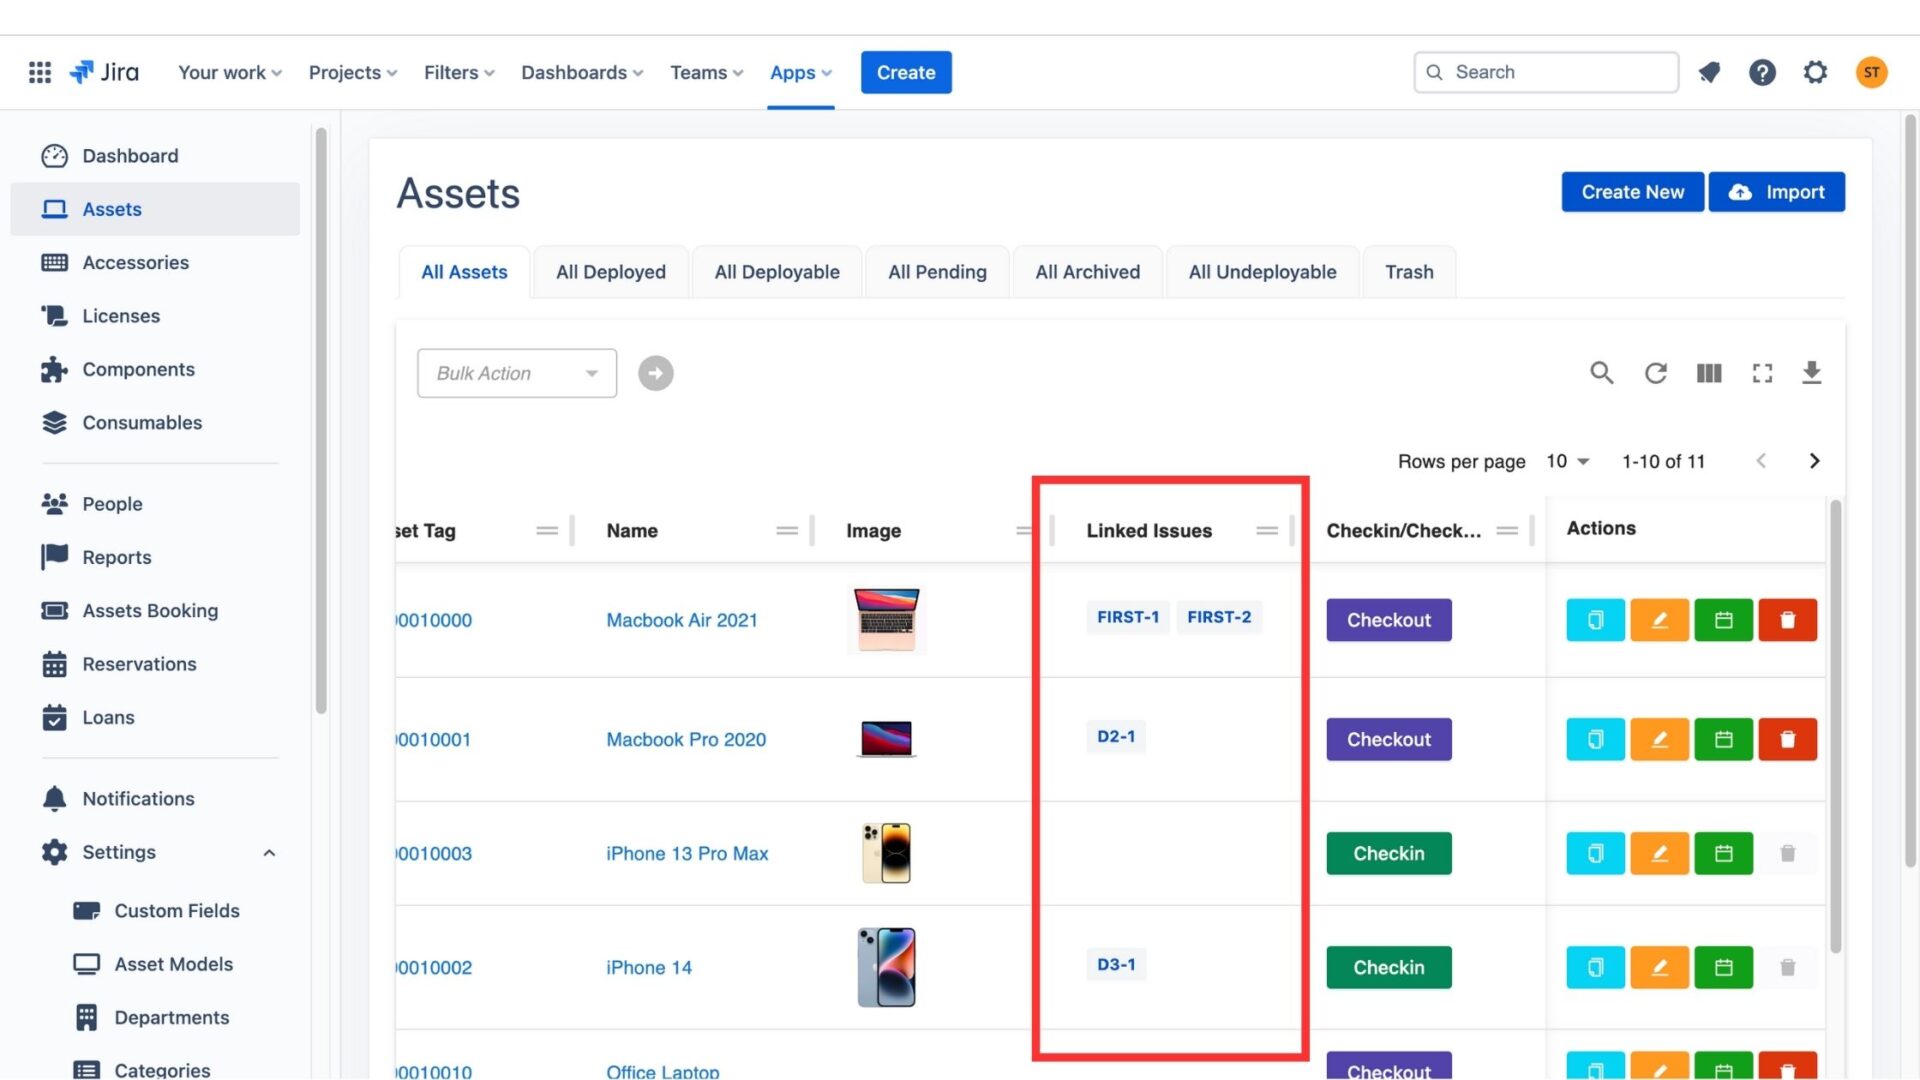 AssetIT keeps track of and record any issues that are linked or unlinked to a specific asset